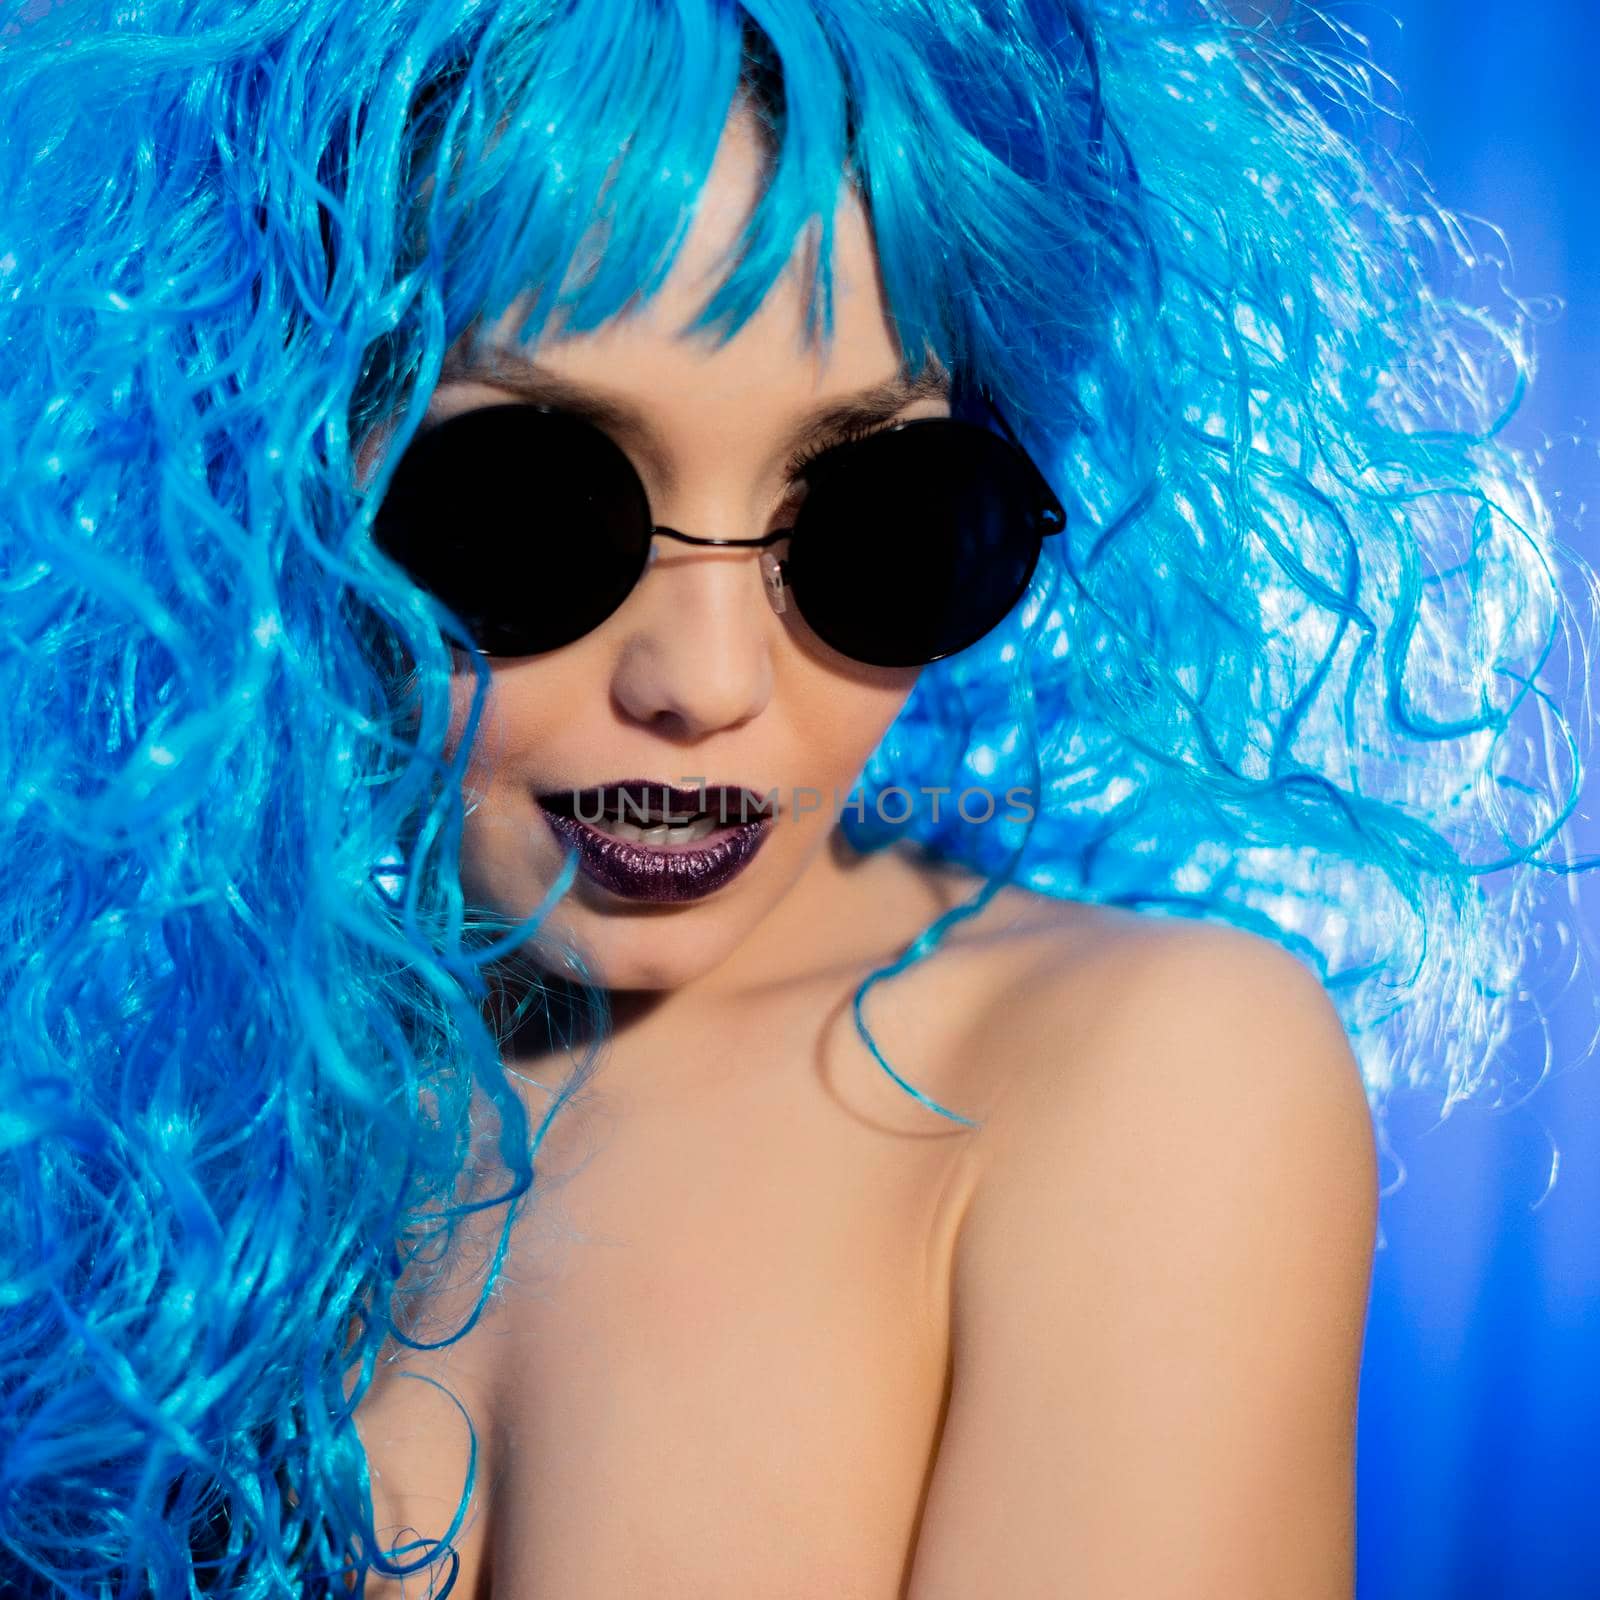 Colorful portrait of an attractive young woman with sunglasses and blue hair